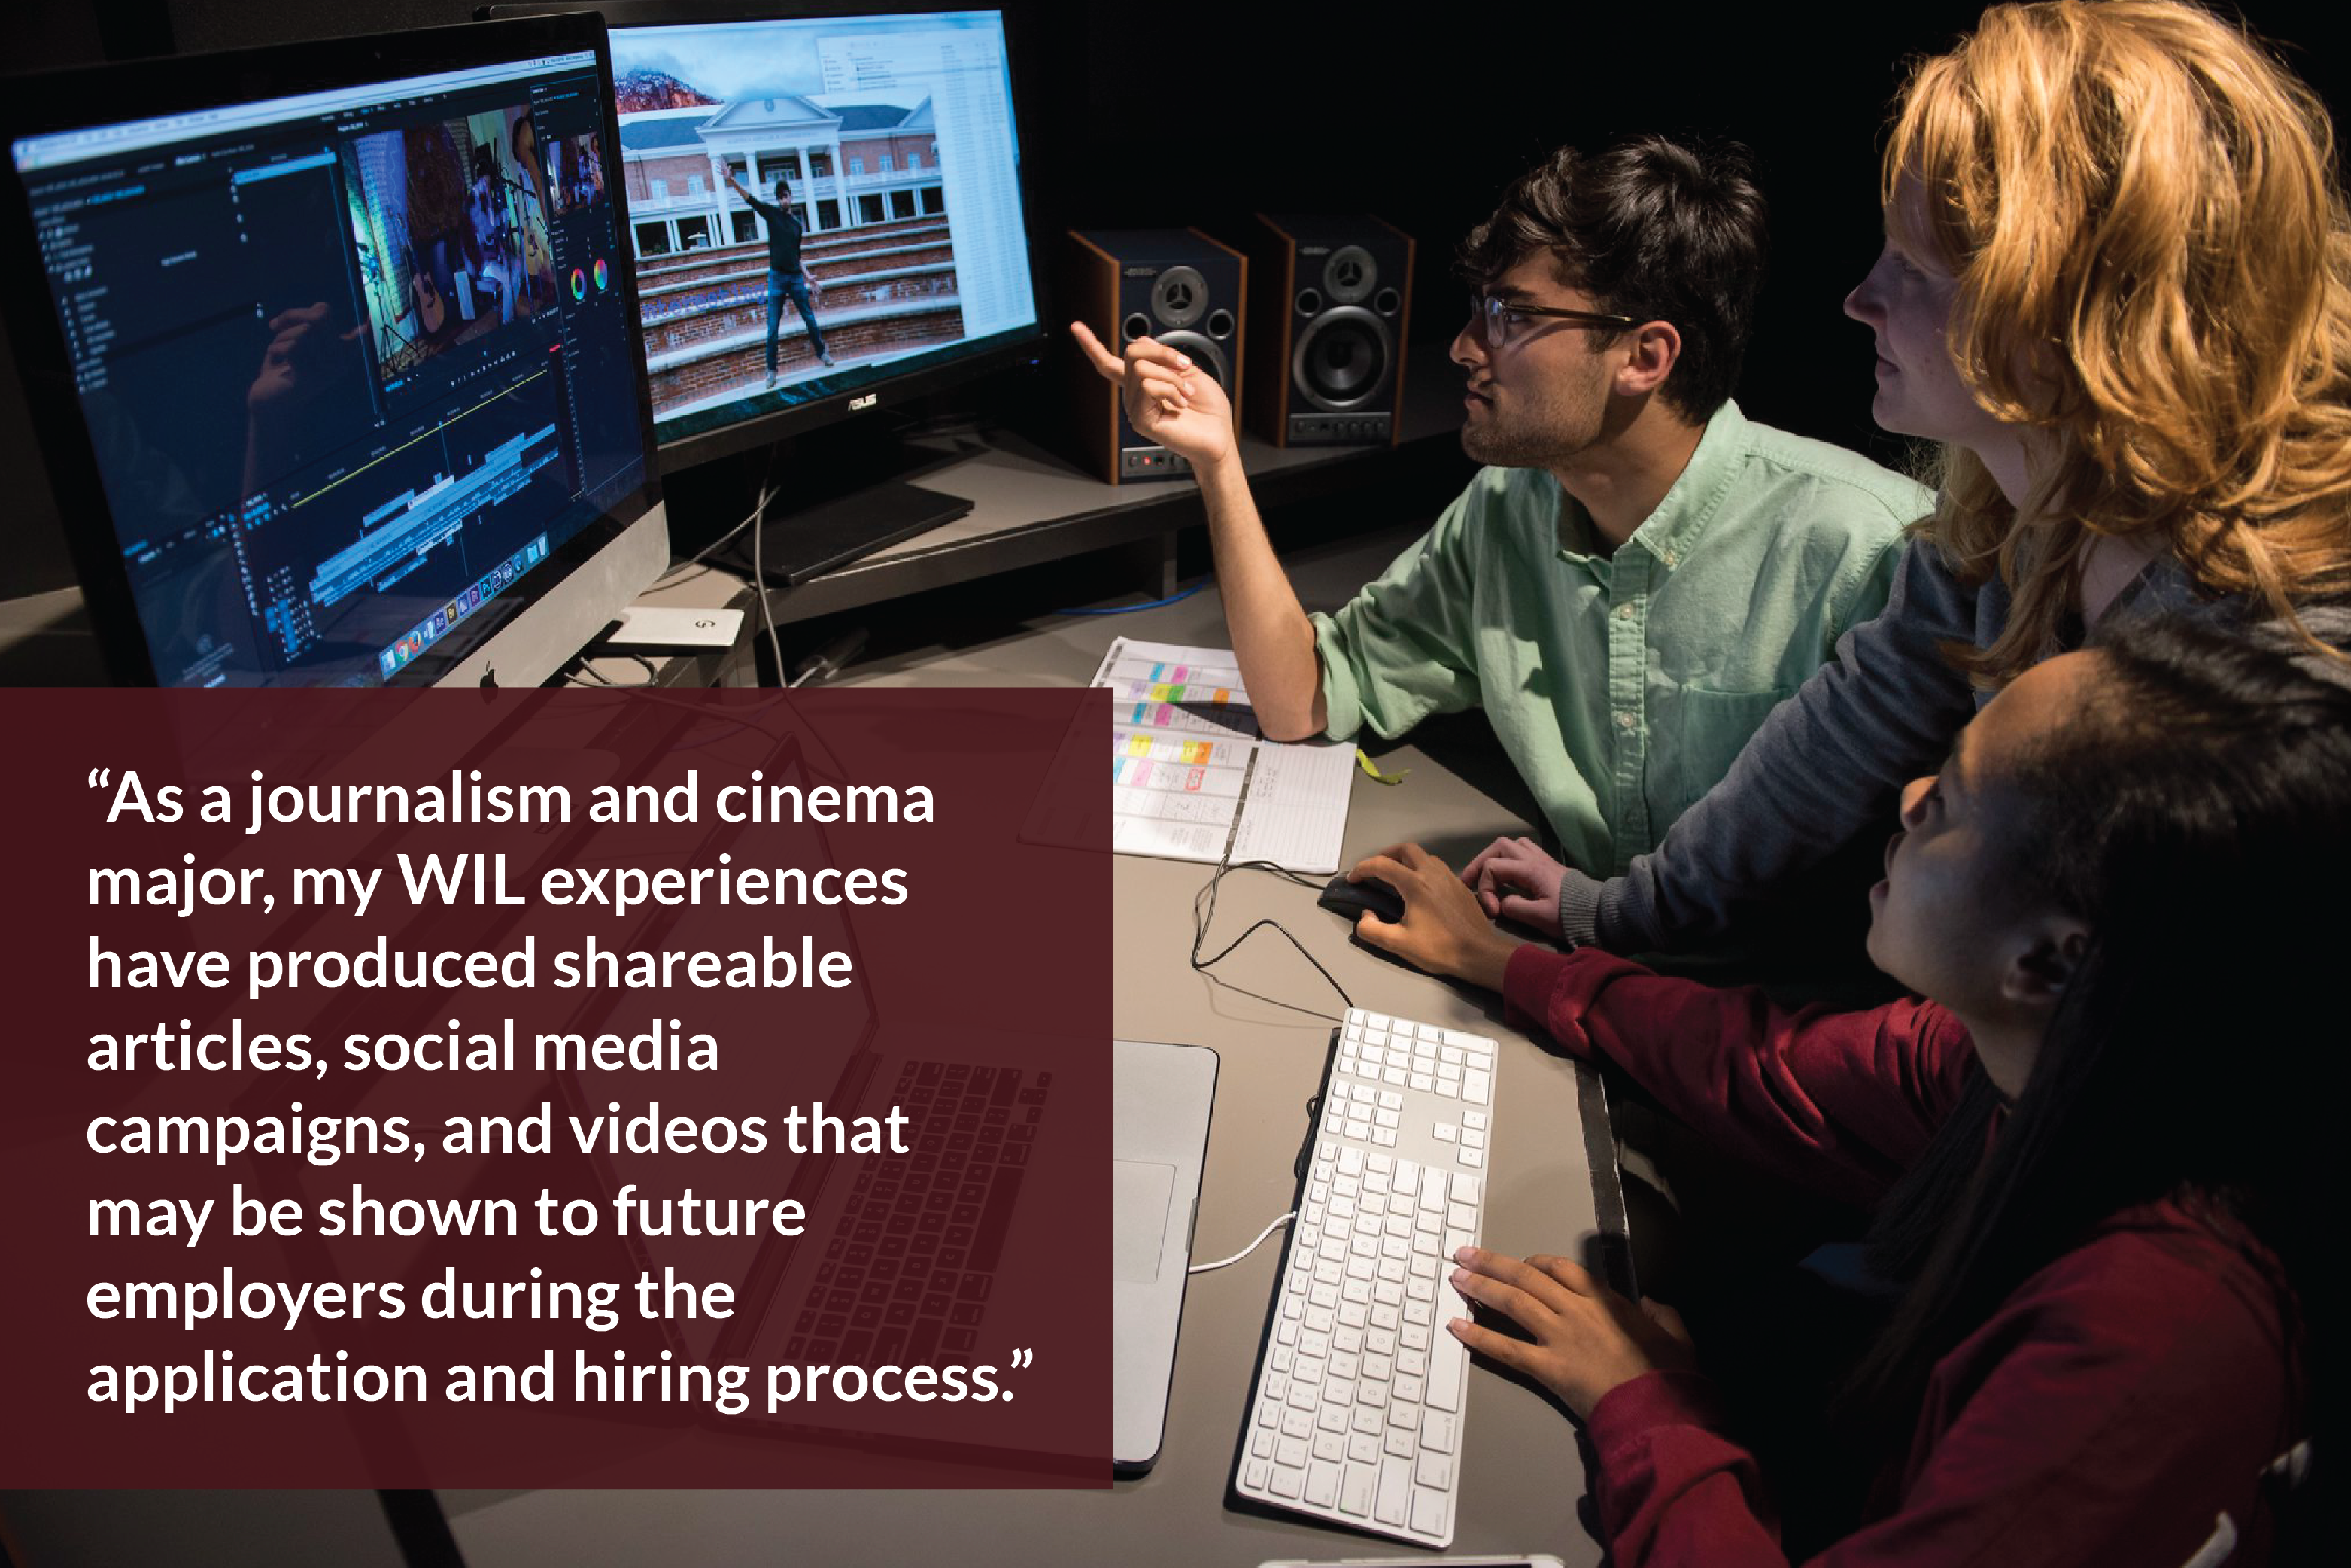 Two students sit at an editing suite. A laptop and two large monitors sit in front of them. A woman leans over the students' shoulder as she looks at the video on the monitor. Text overlay reads "As a journalism and cinema major, my WIL experiences have produced shareable articles, social media campaigns, and videos that may be shown to future employers during the application and hiring process."